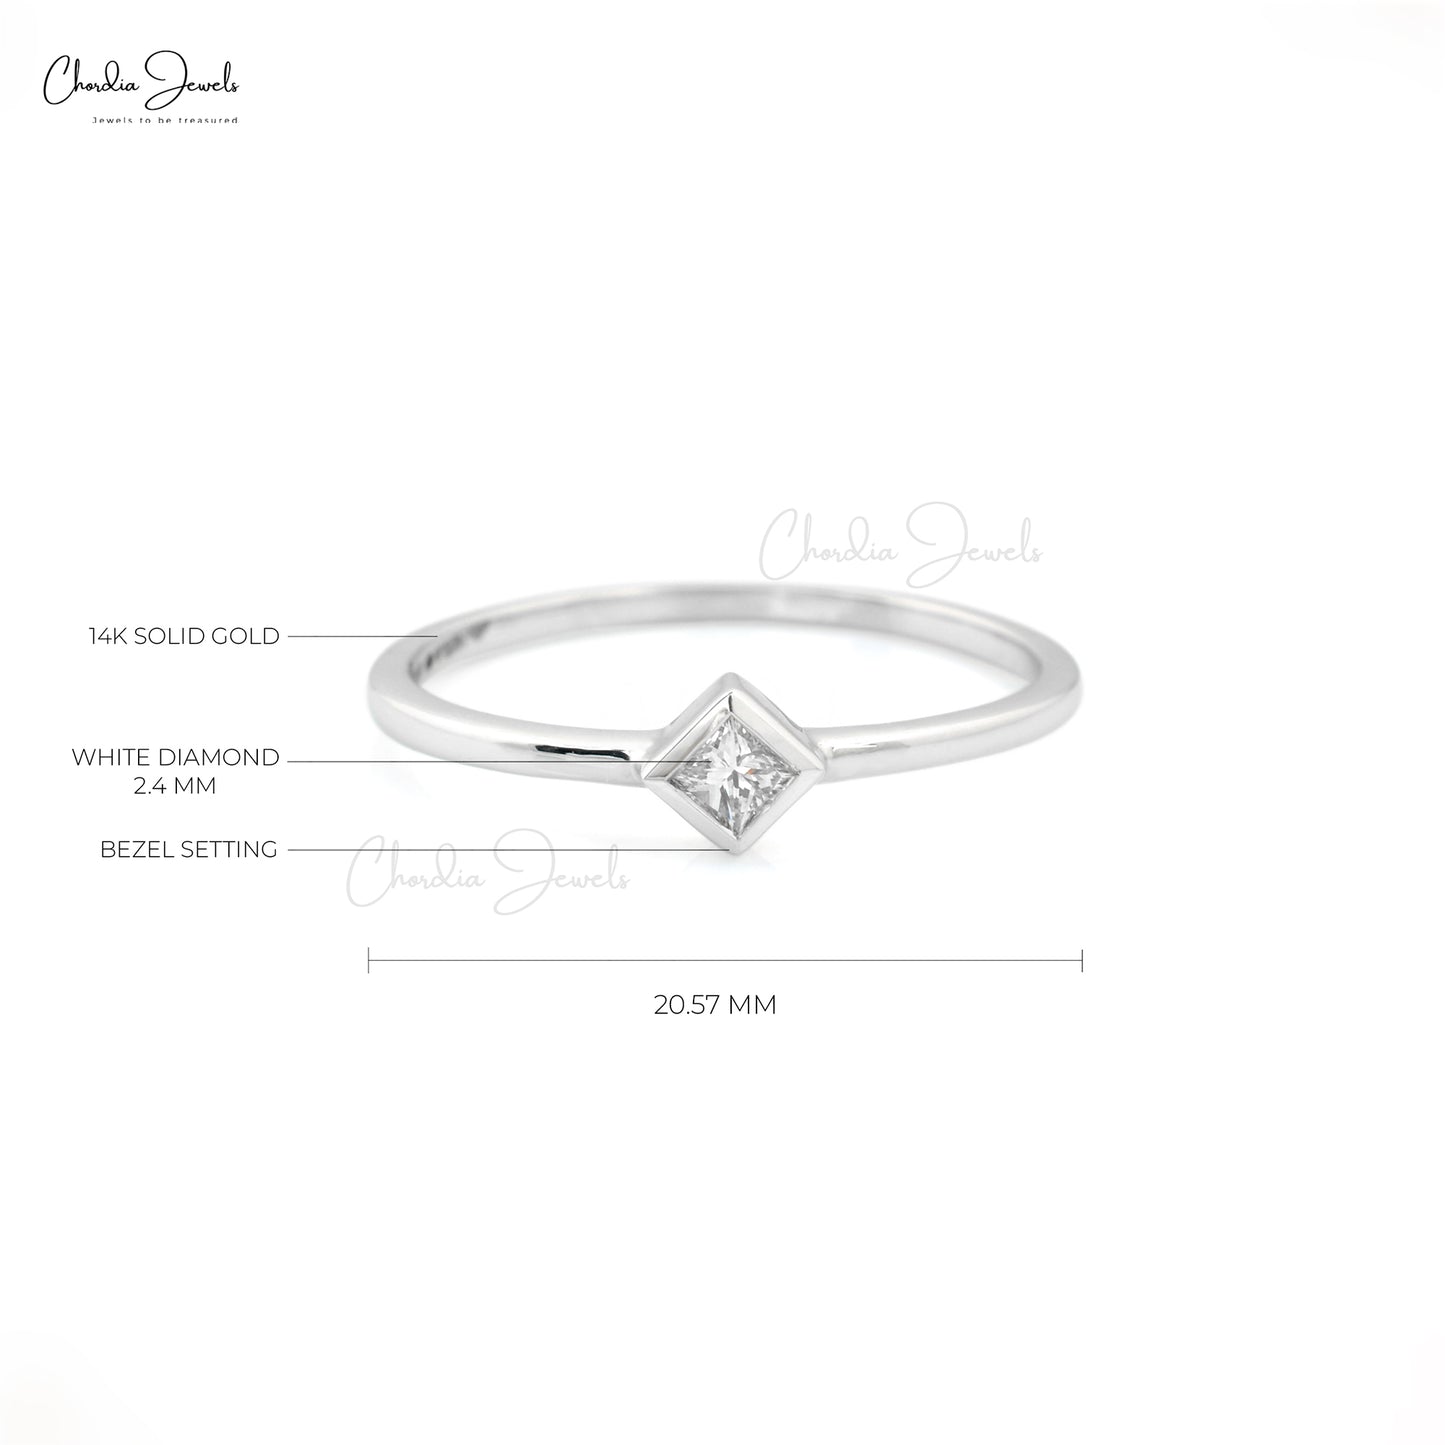 White Diamond Solitaire Ring 2.4mm Square Princess Cut Ring Size US-6 14k Solid White Gold Ring For Wedding